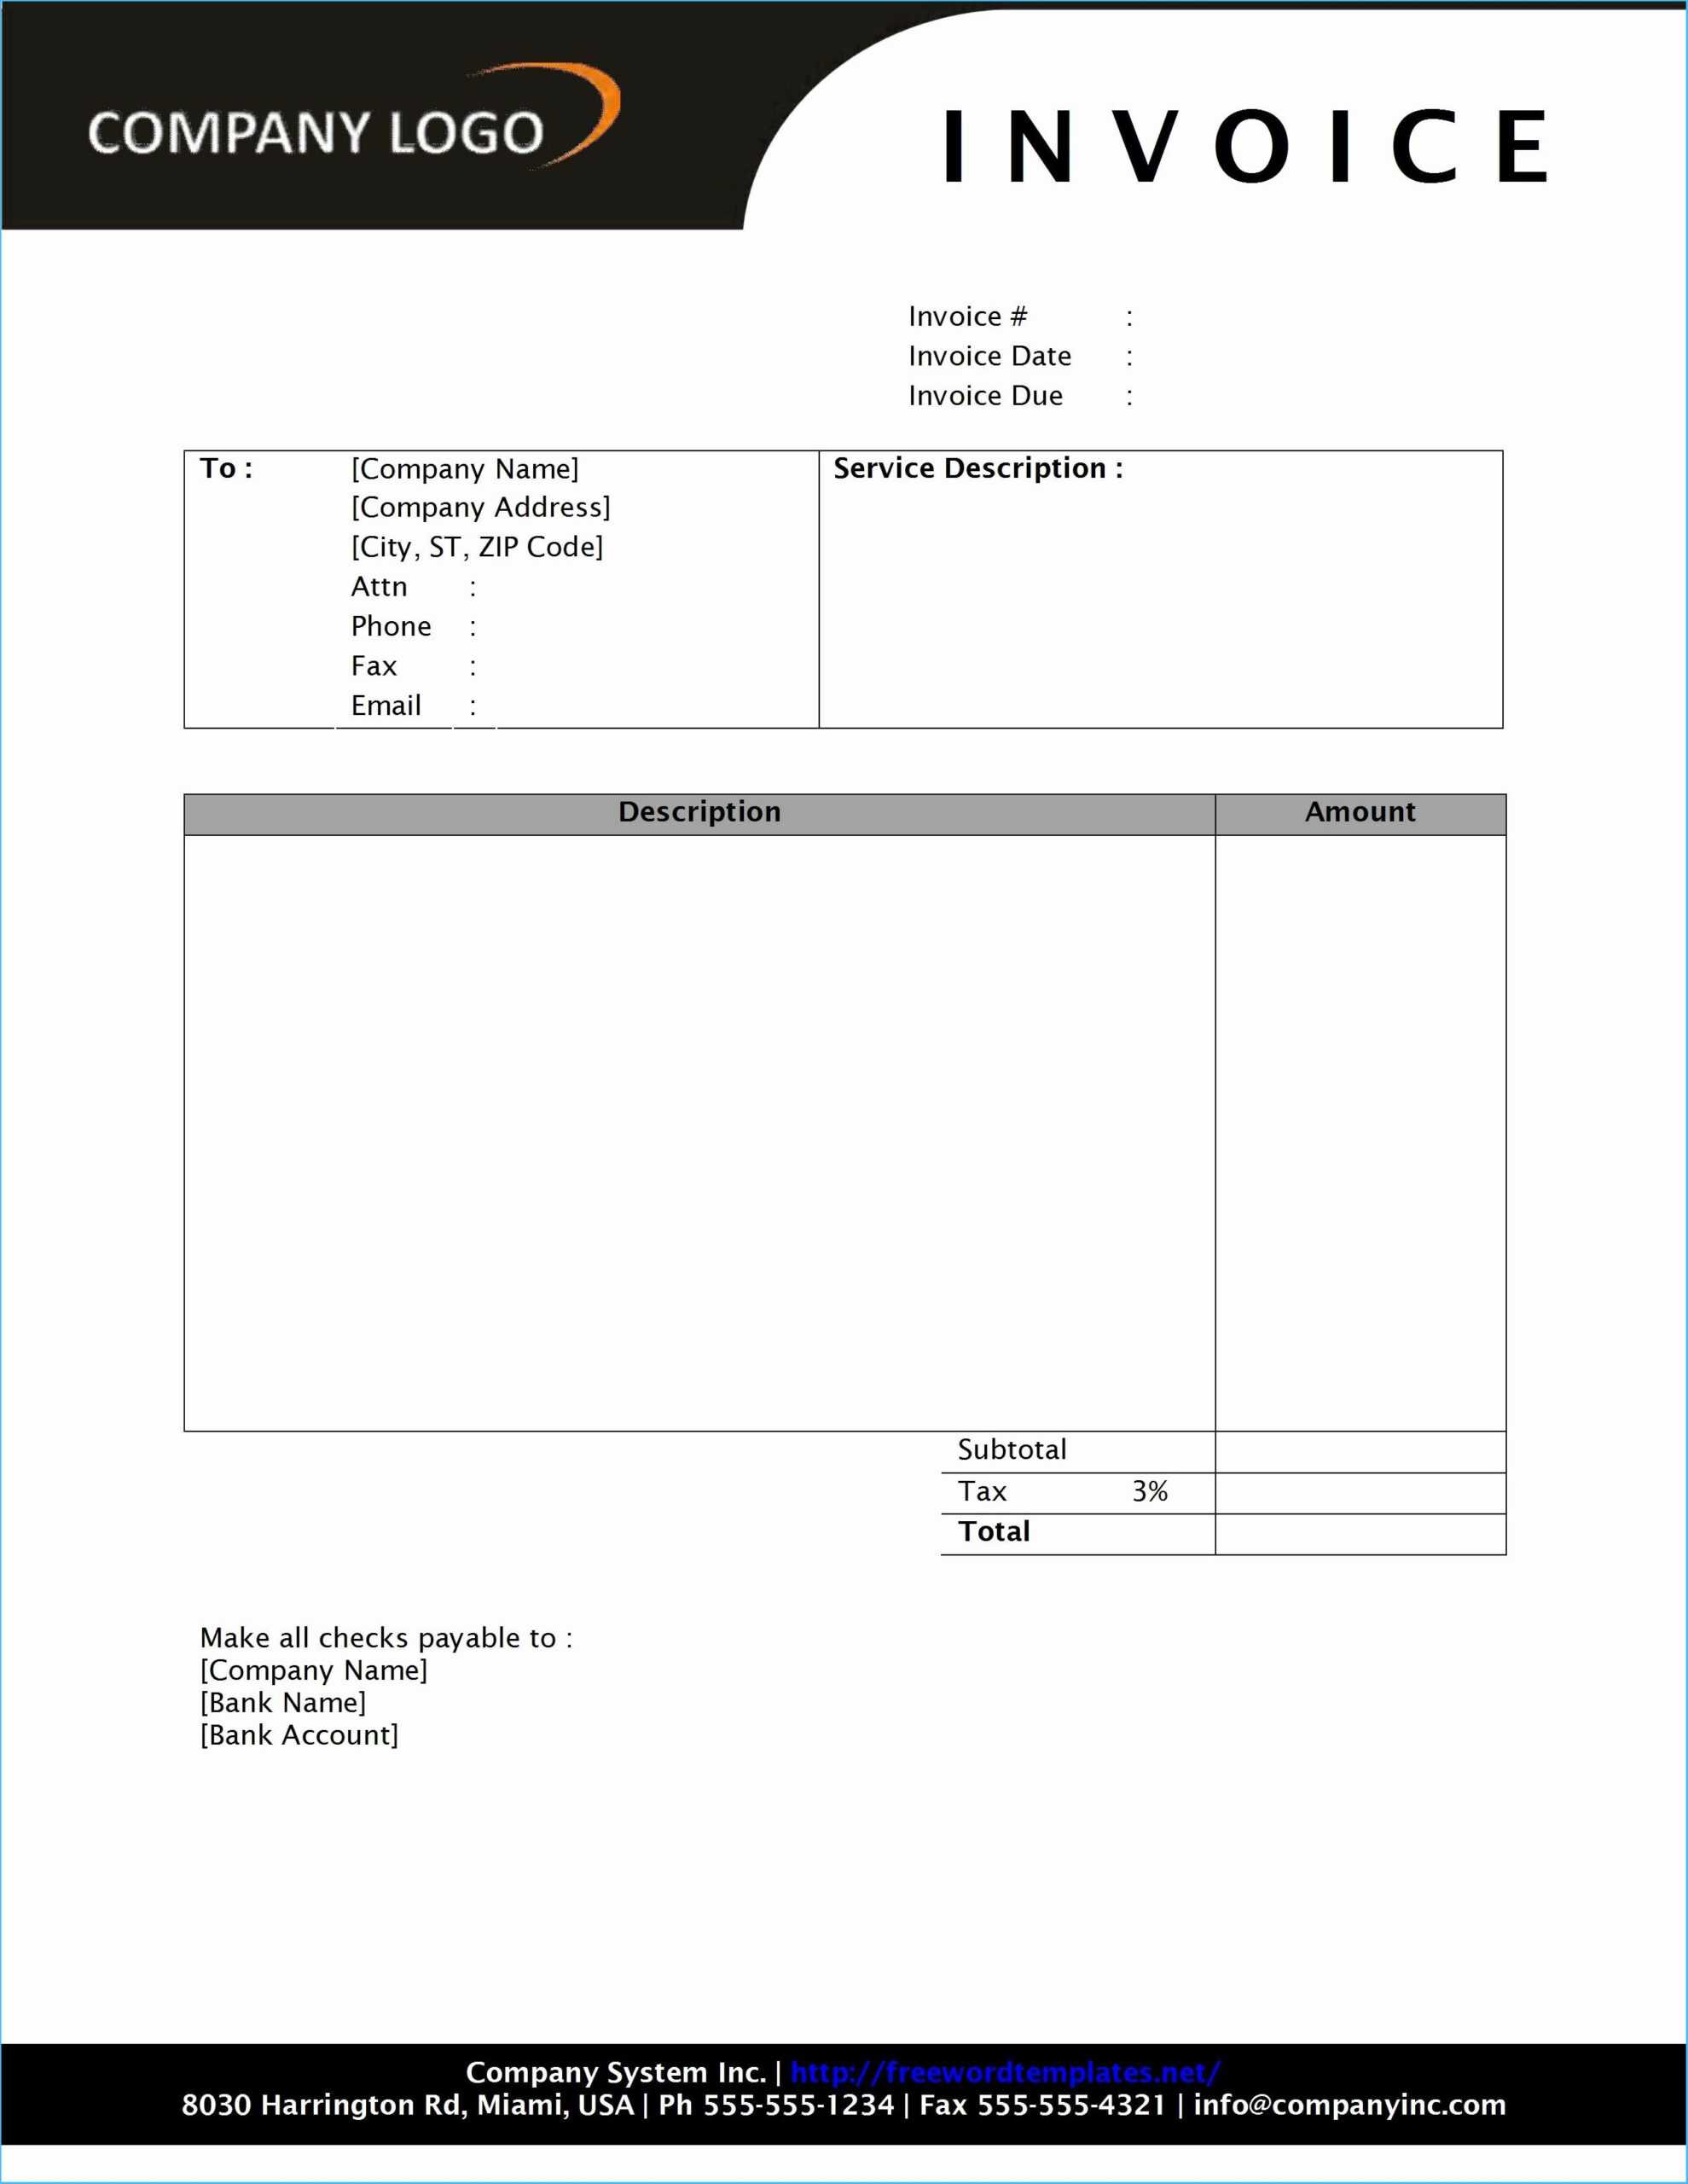 Latest Invoice Template Word 2010 Which You Need To Make Within Invoice Template Word 2010